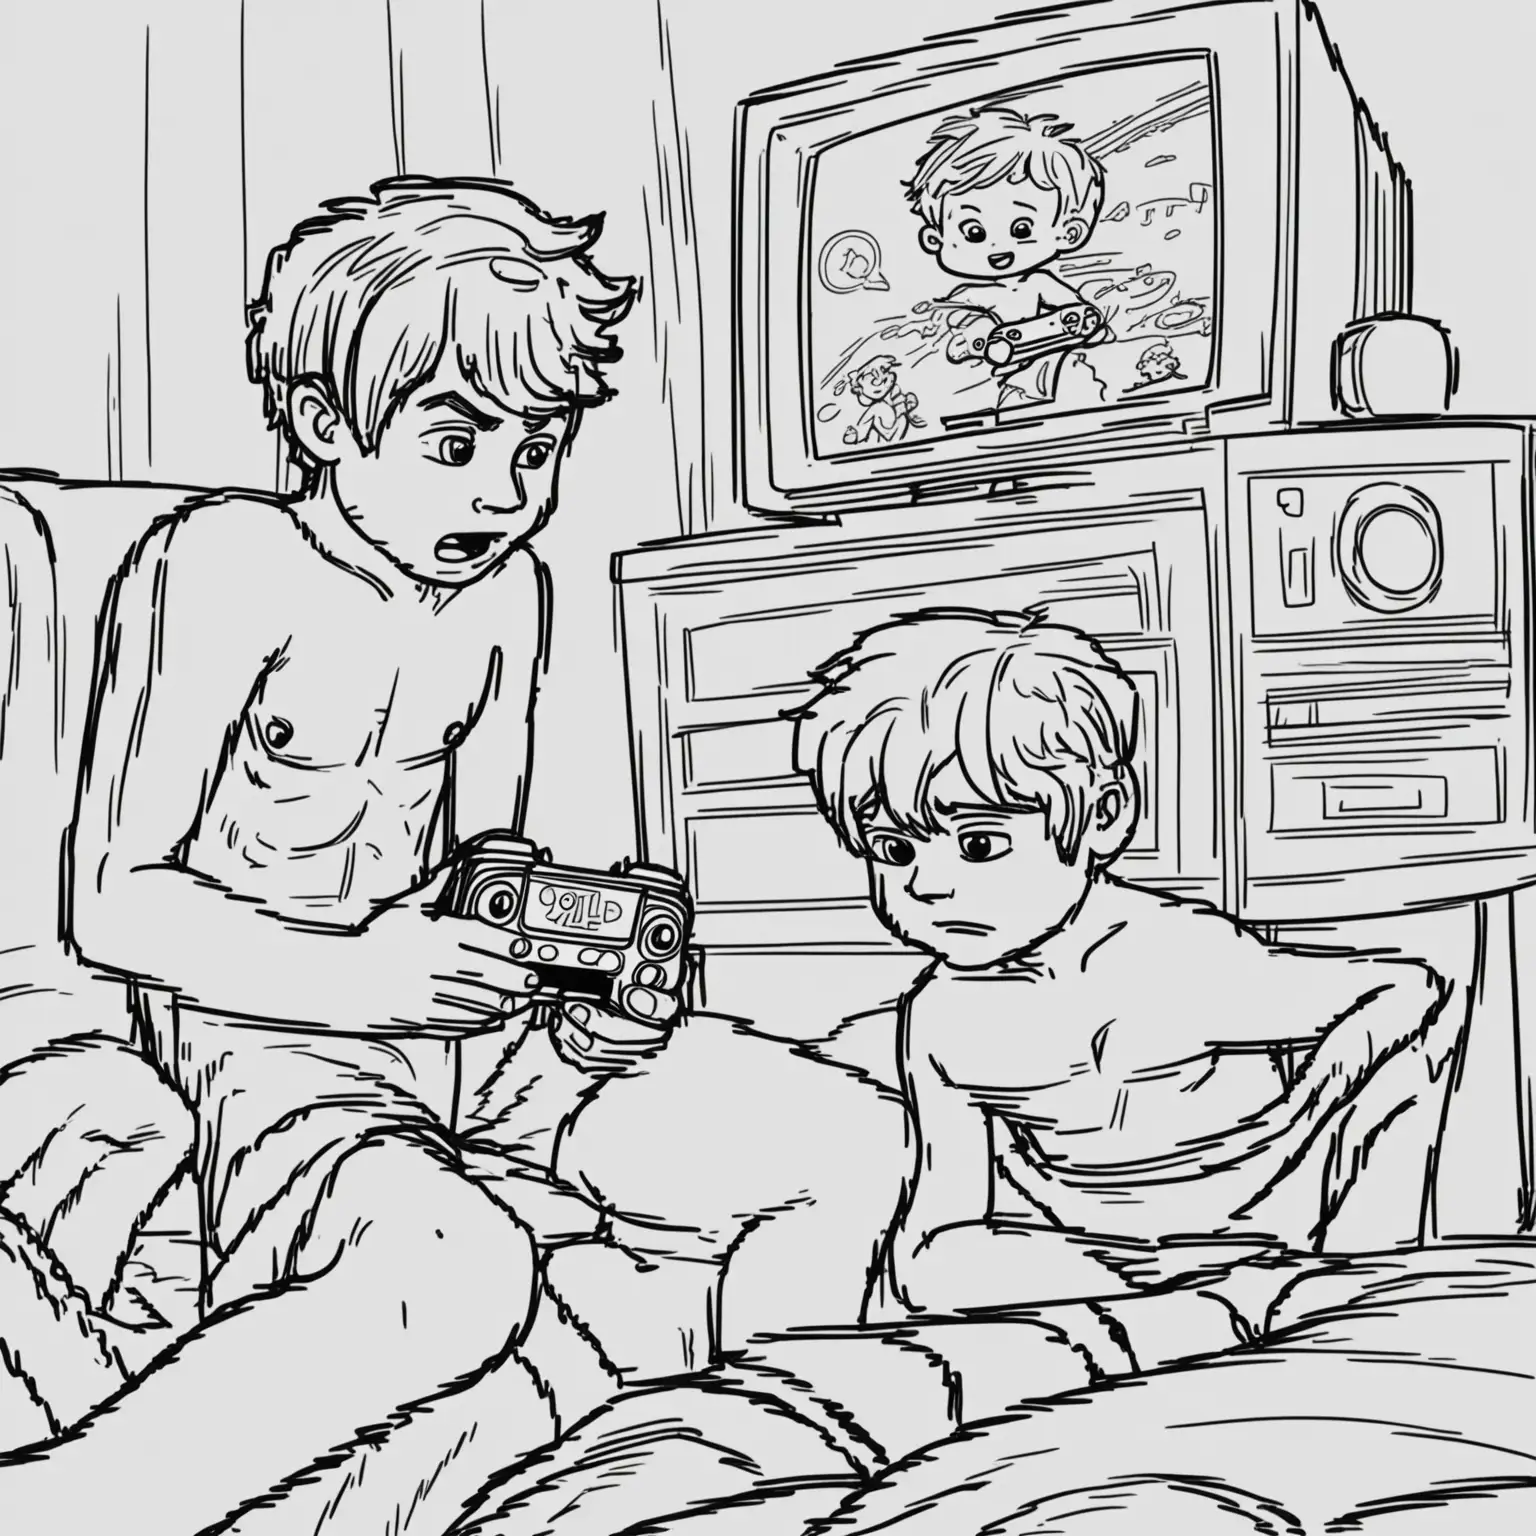 imagine prompt,  coloring page for kids, boys playing videogames, shirtless, cartoon style. low detail, thick lines, no shading, 9:11